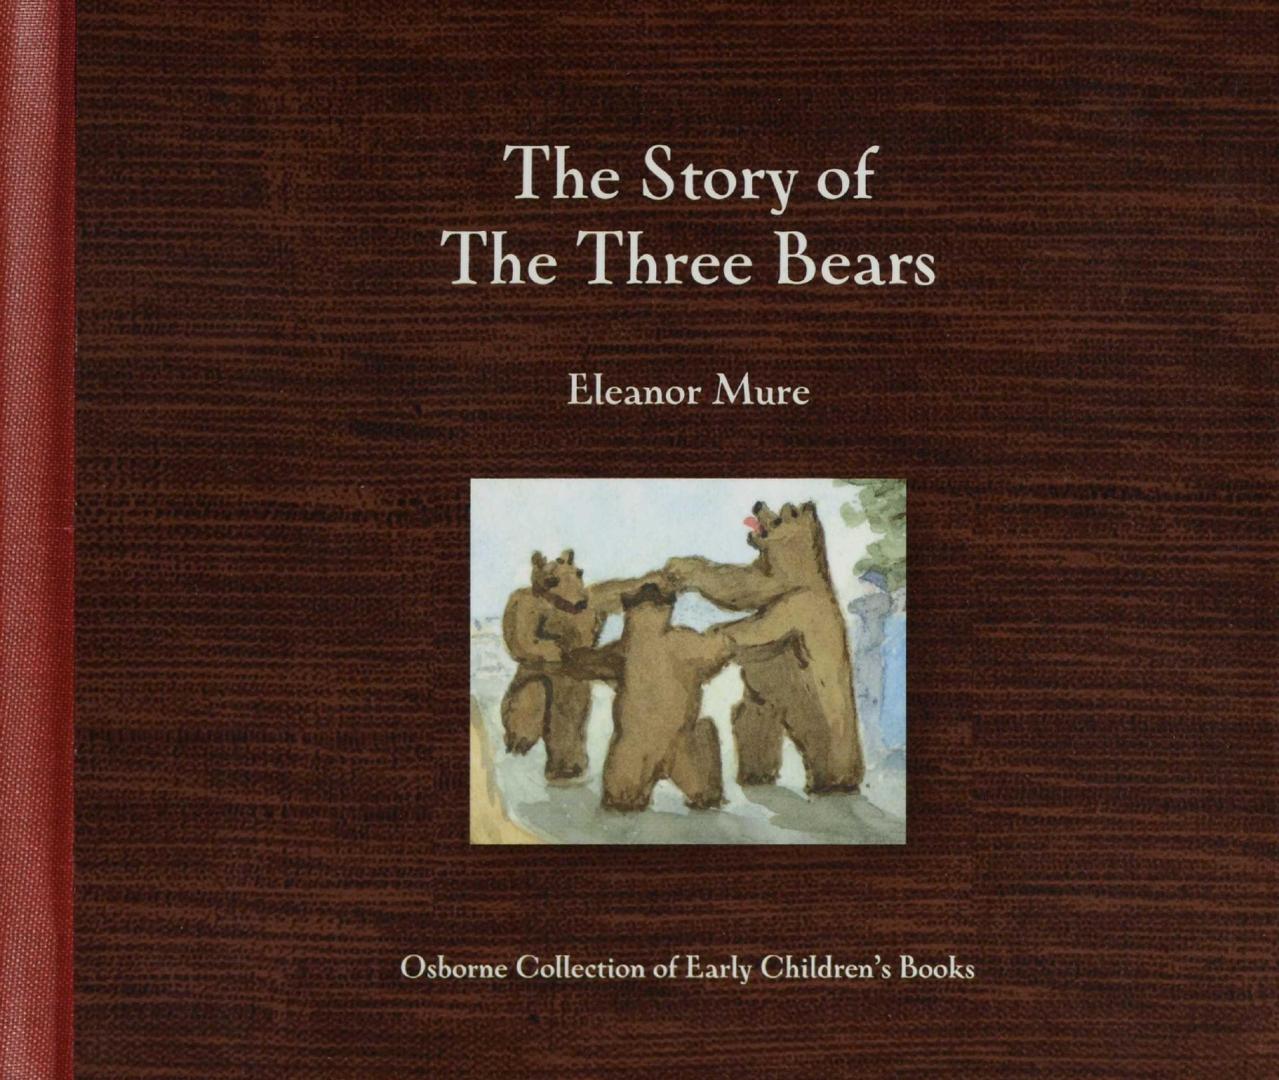 The story of the three bears : metrically related with illustrations locating it at Cecil Lodge in September 1831